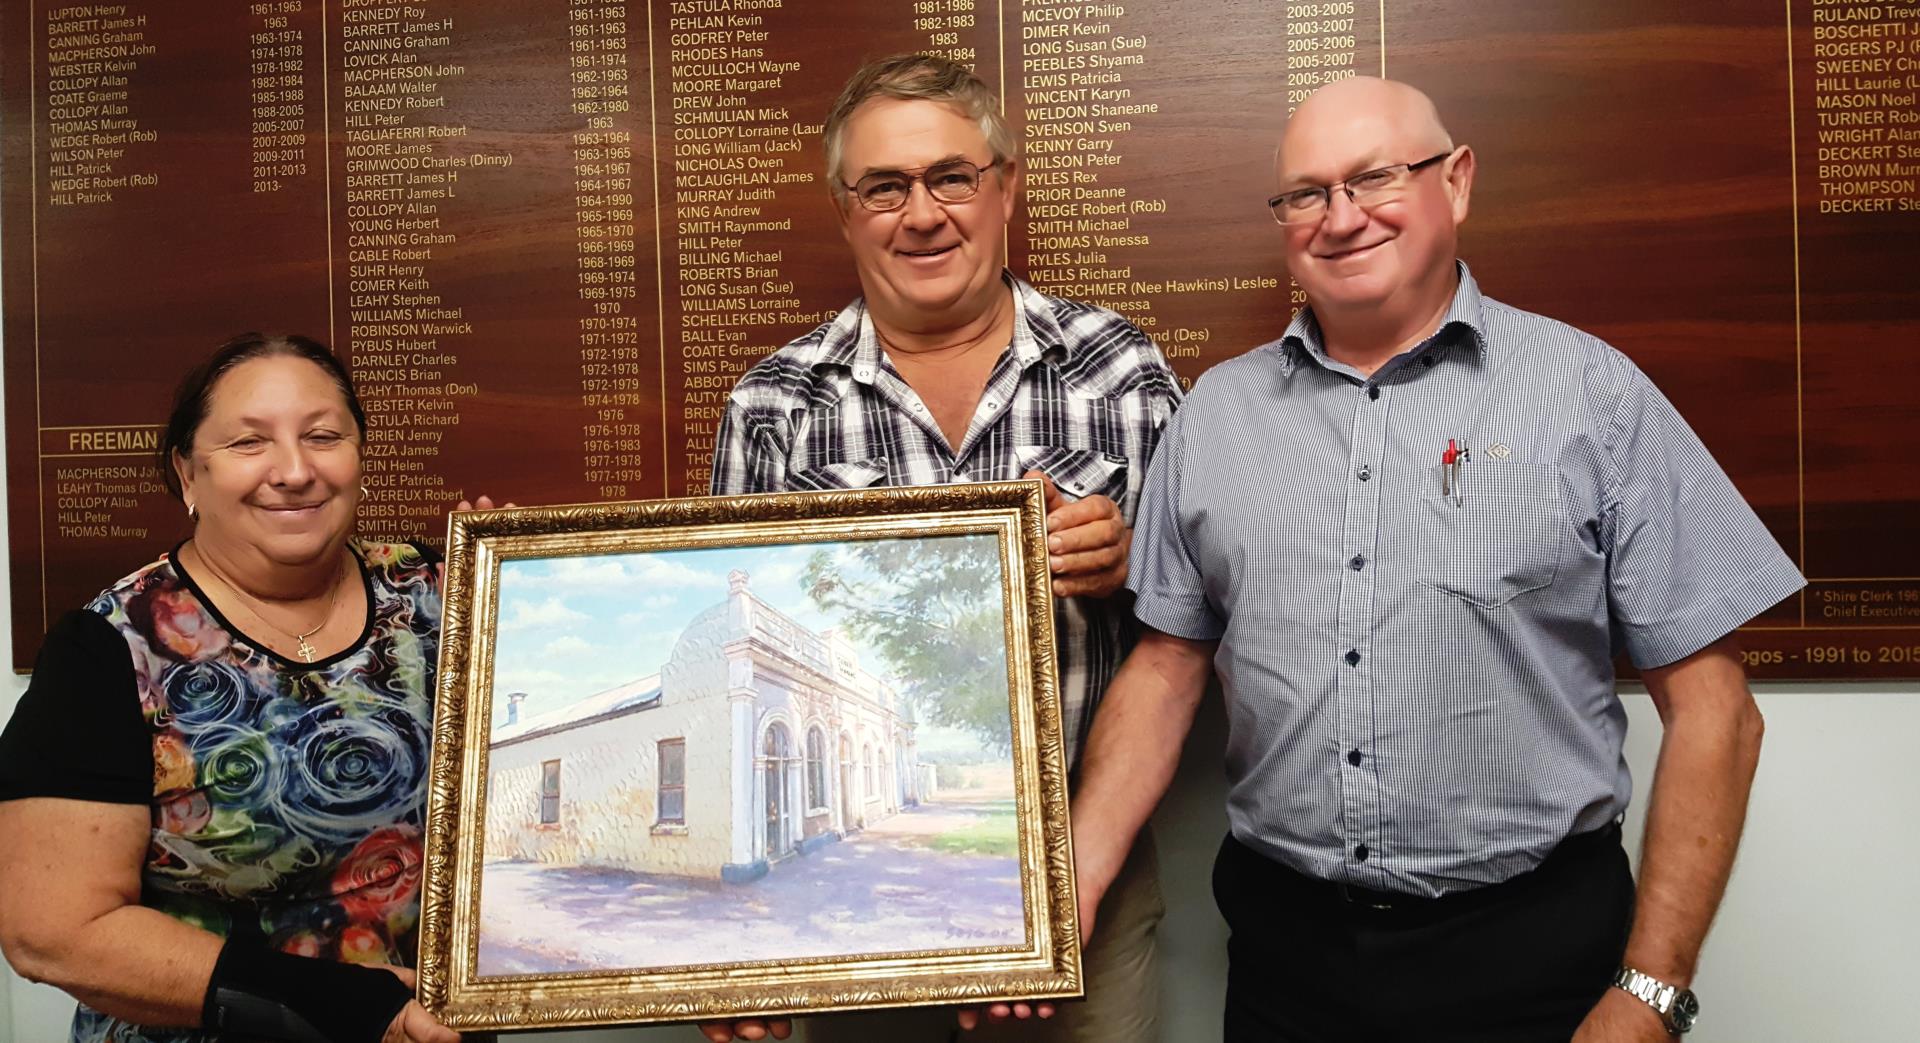 Cr Rosemary Street presenting the Coach House painting to Cr Pat Hill, Shire President and Peter Naylor, Chief Executive Officer.